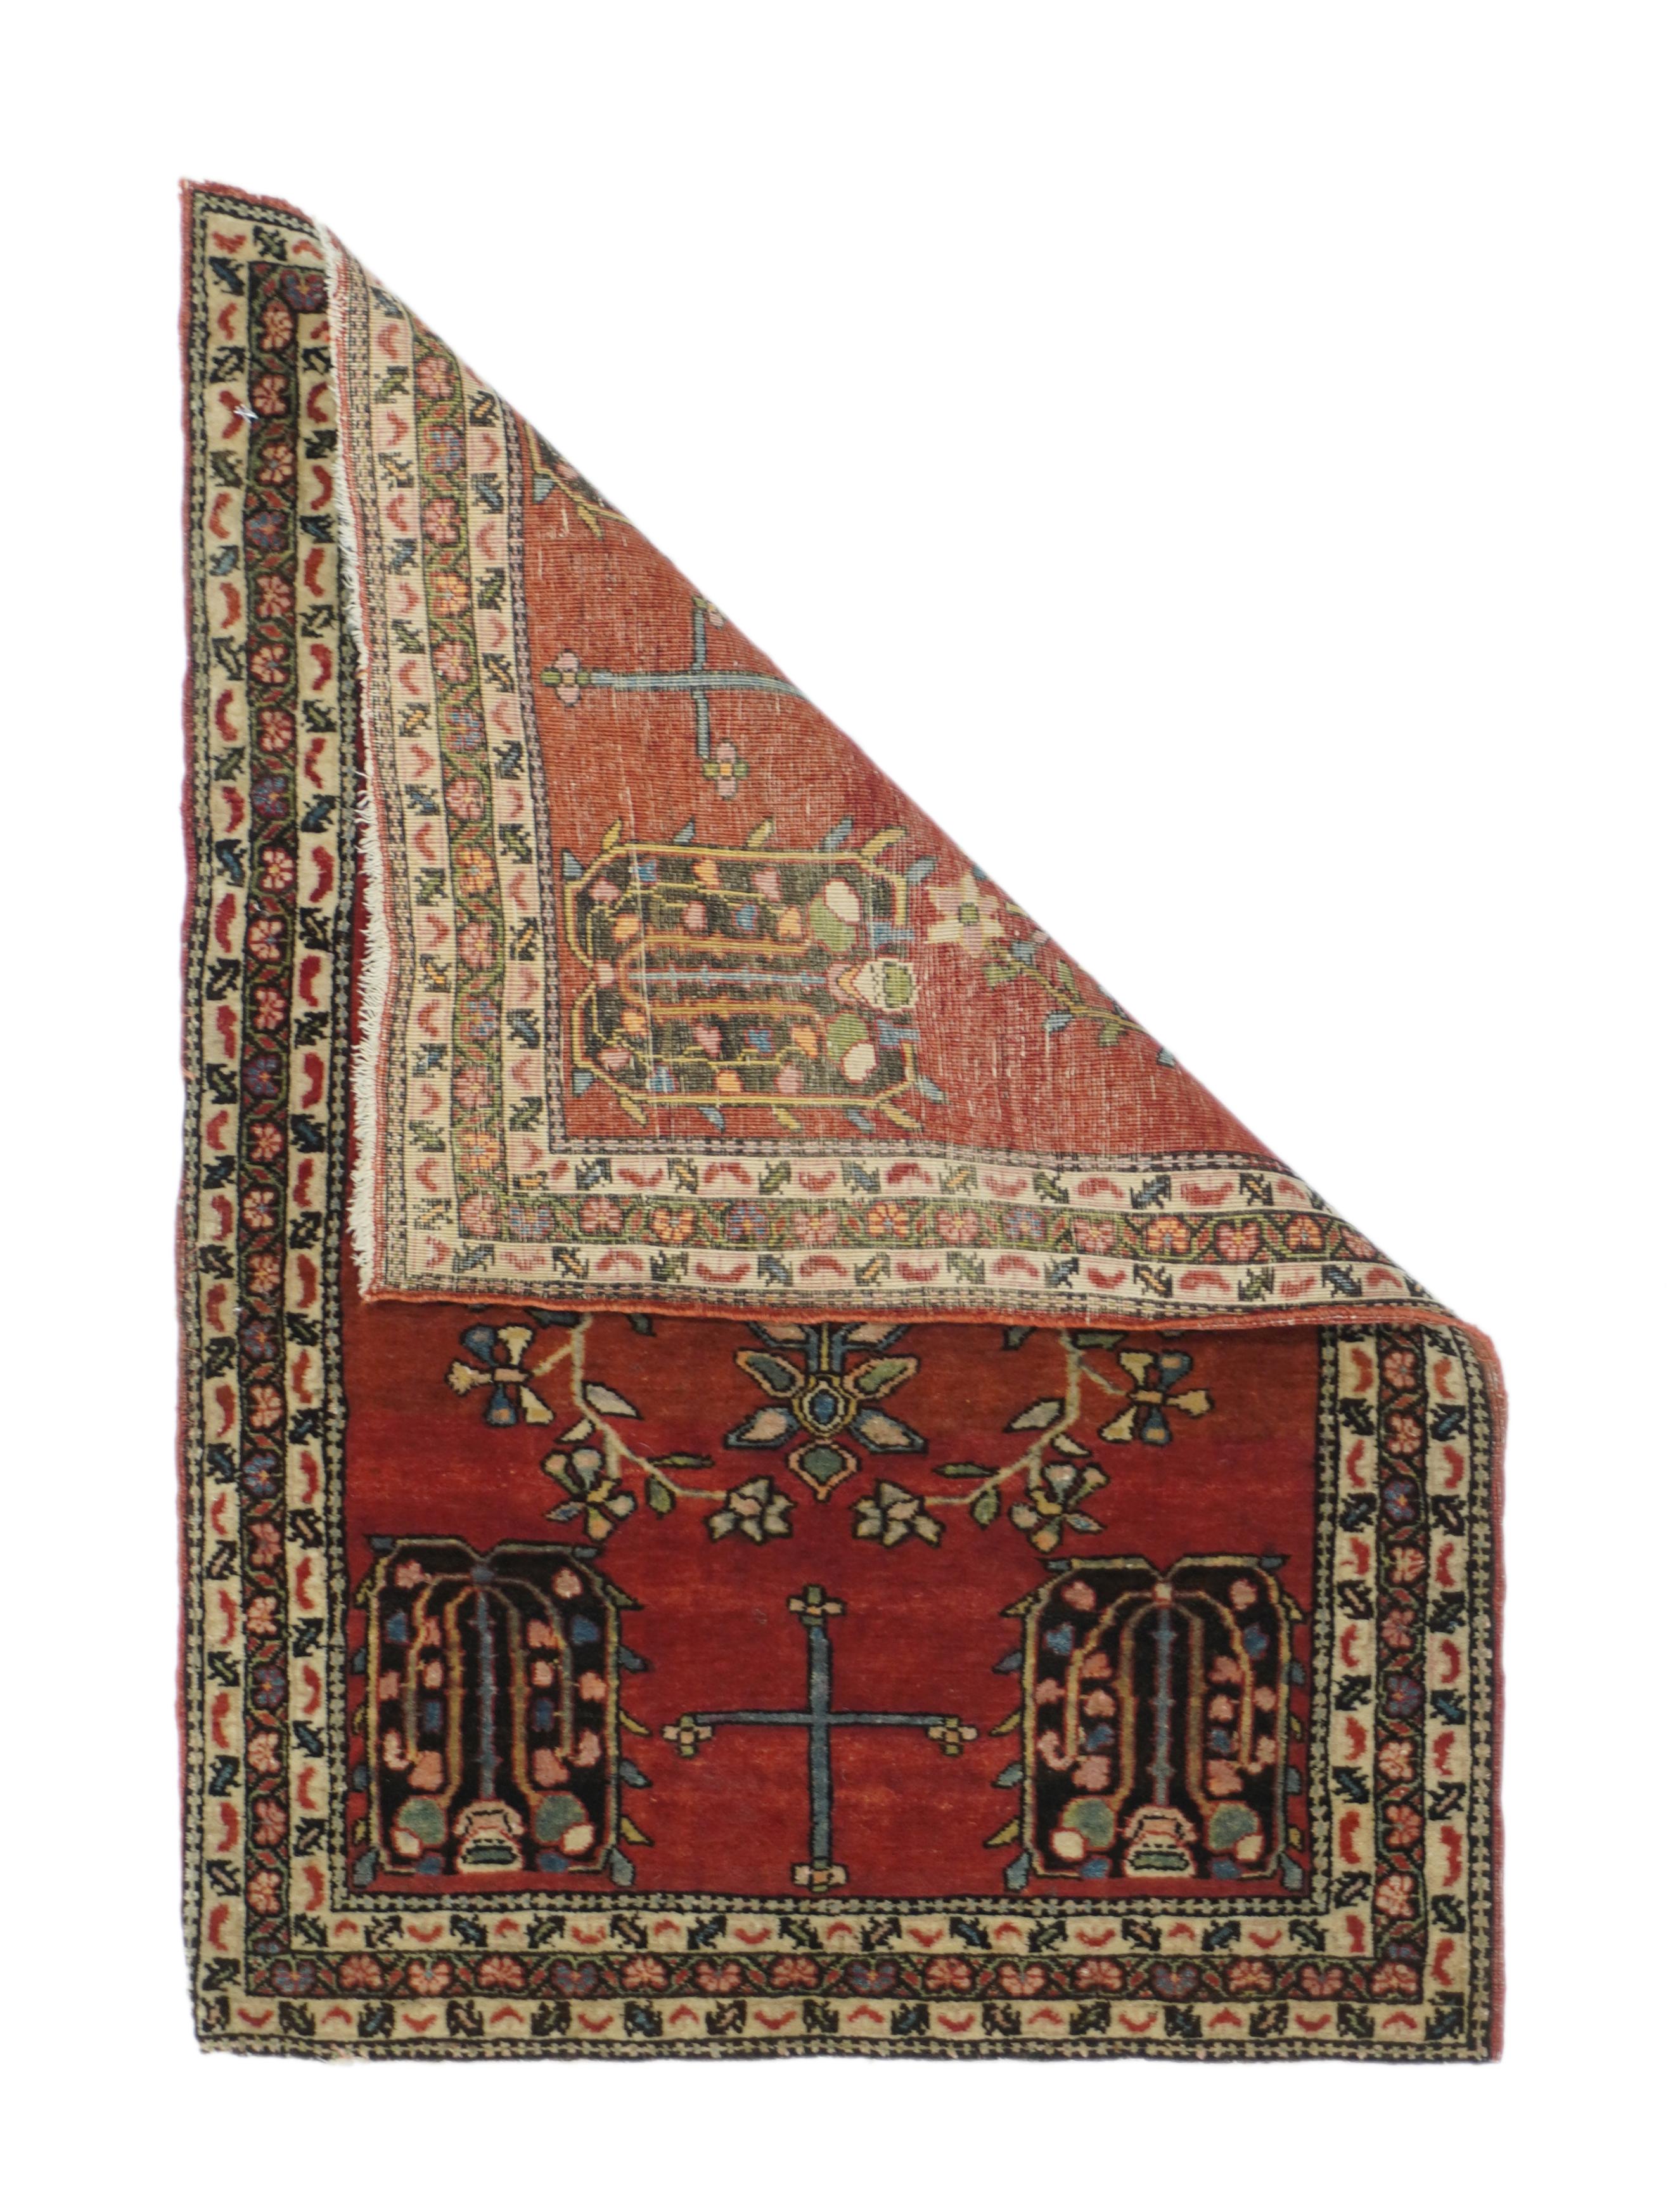 Antique Mohajeran Sarouk rug 1'10'' x 2'9''. This well-woven west Persian village ruglet presents a crimson red field with navy weeping willow and vase motives, and a slender central axial pole with attached and adjacent floral sprays. Reversing fan